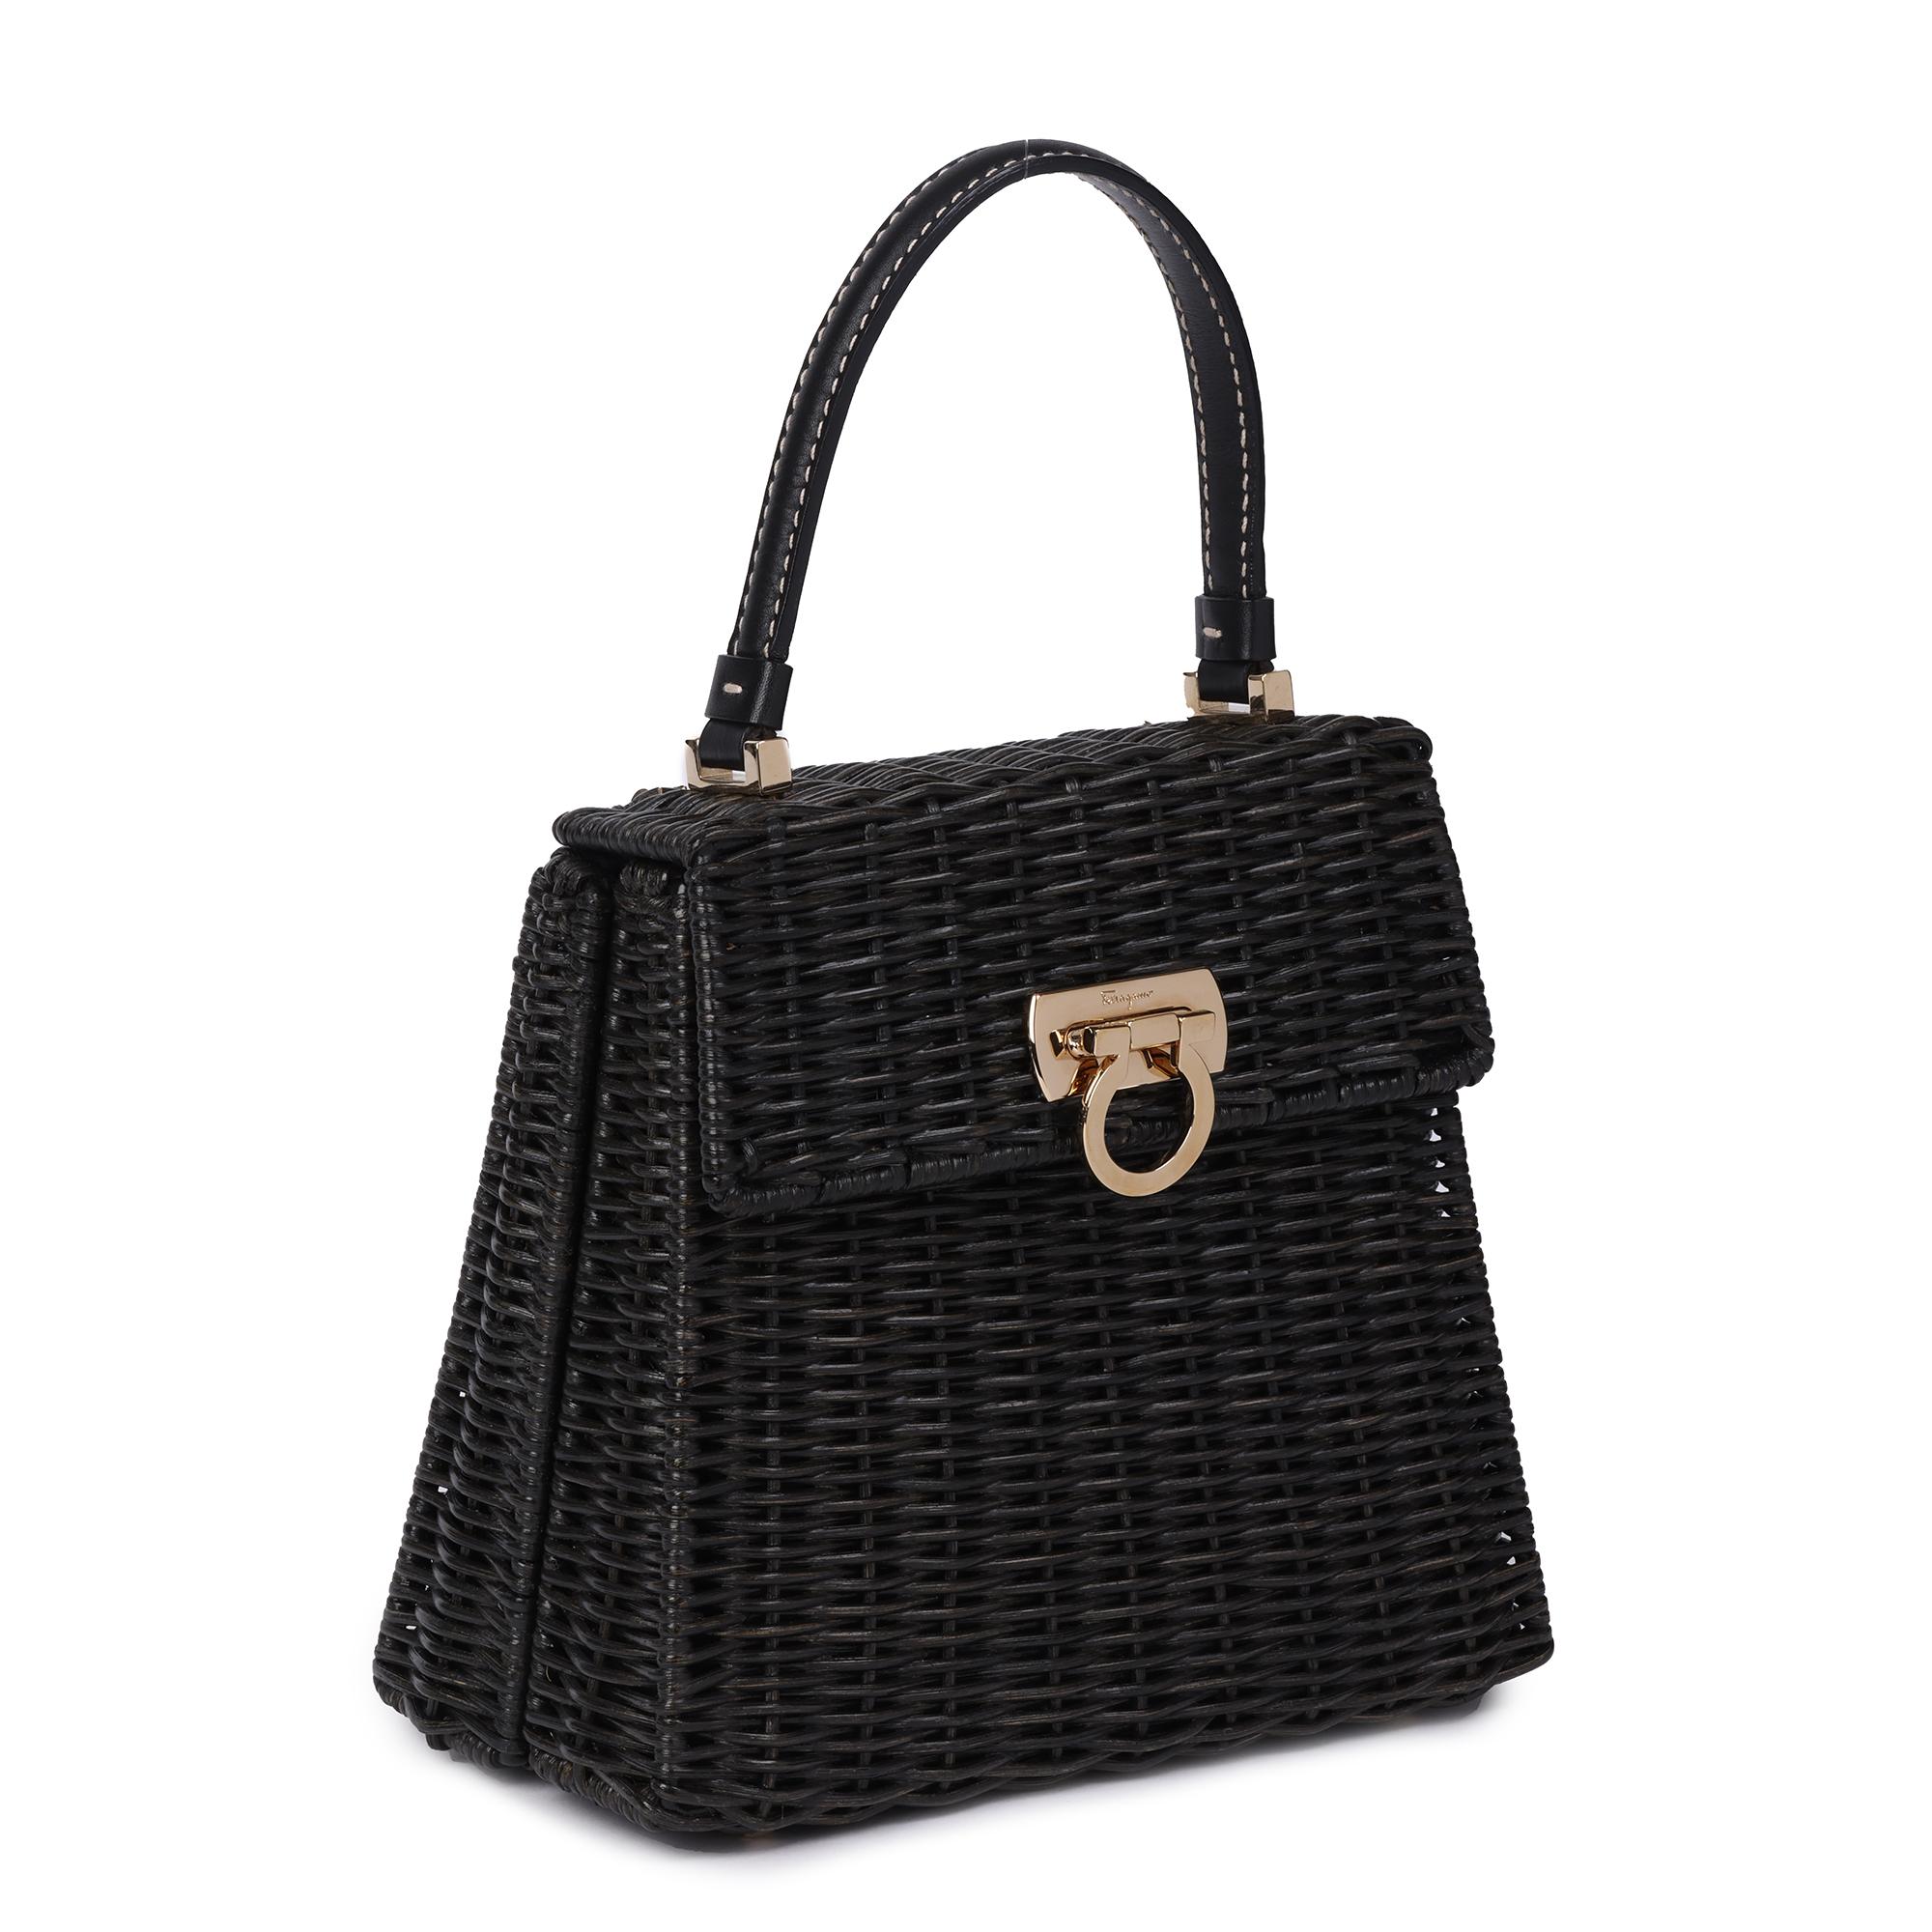 SALVATORE FERRAGAMO
Black Wicker & Calfskin Leather Vintage Gancini

Xupes Reference: JJLG067
Serial Number: DV-21 3403
Age (Circa): 1990
Accompanied By: Salvatore Ferragamo Dust Bag
Authenticity Details: Date Stamp (Made in Italy)
Gender: